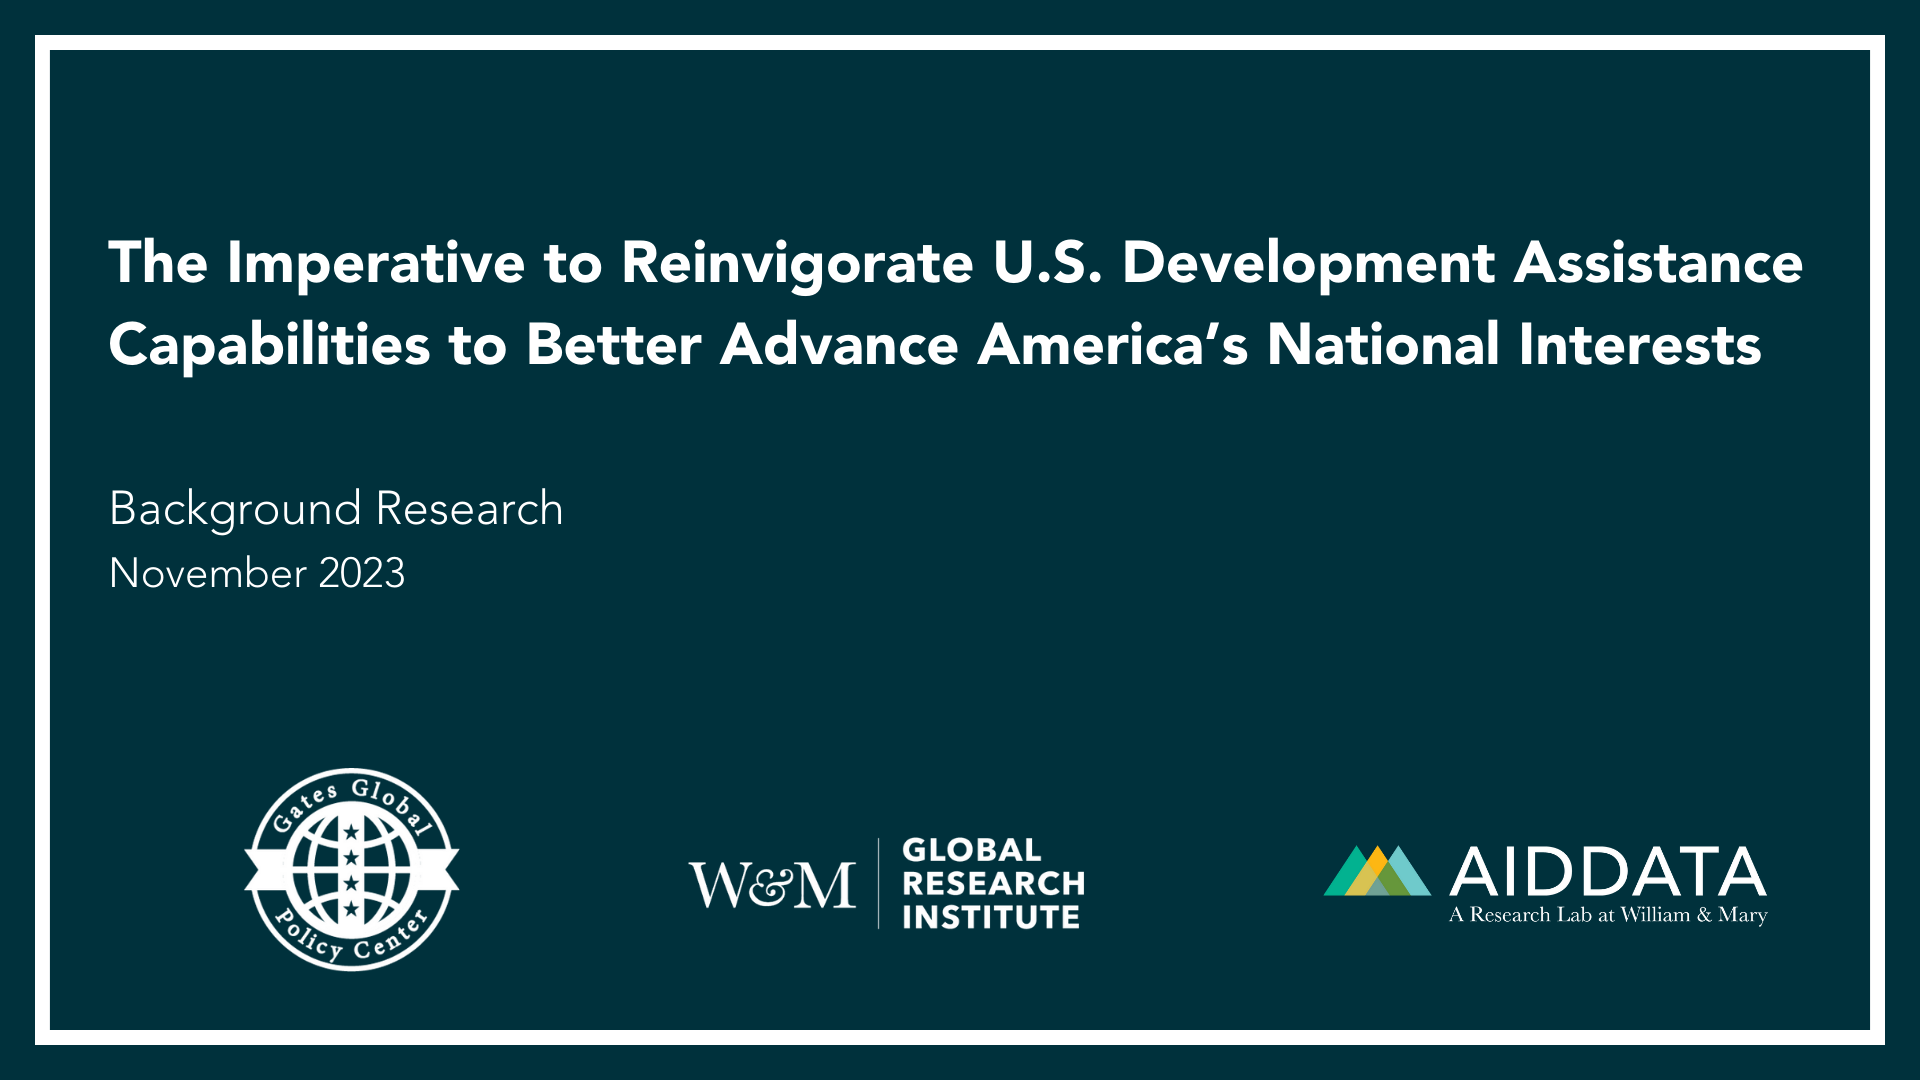 the-imperative-to-reinvigorate-u.s-development-assistance-capabilities-to-better-advance-americas-national-interests.png